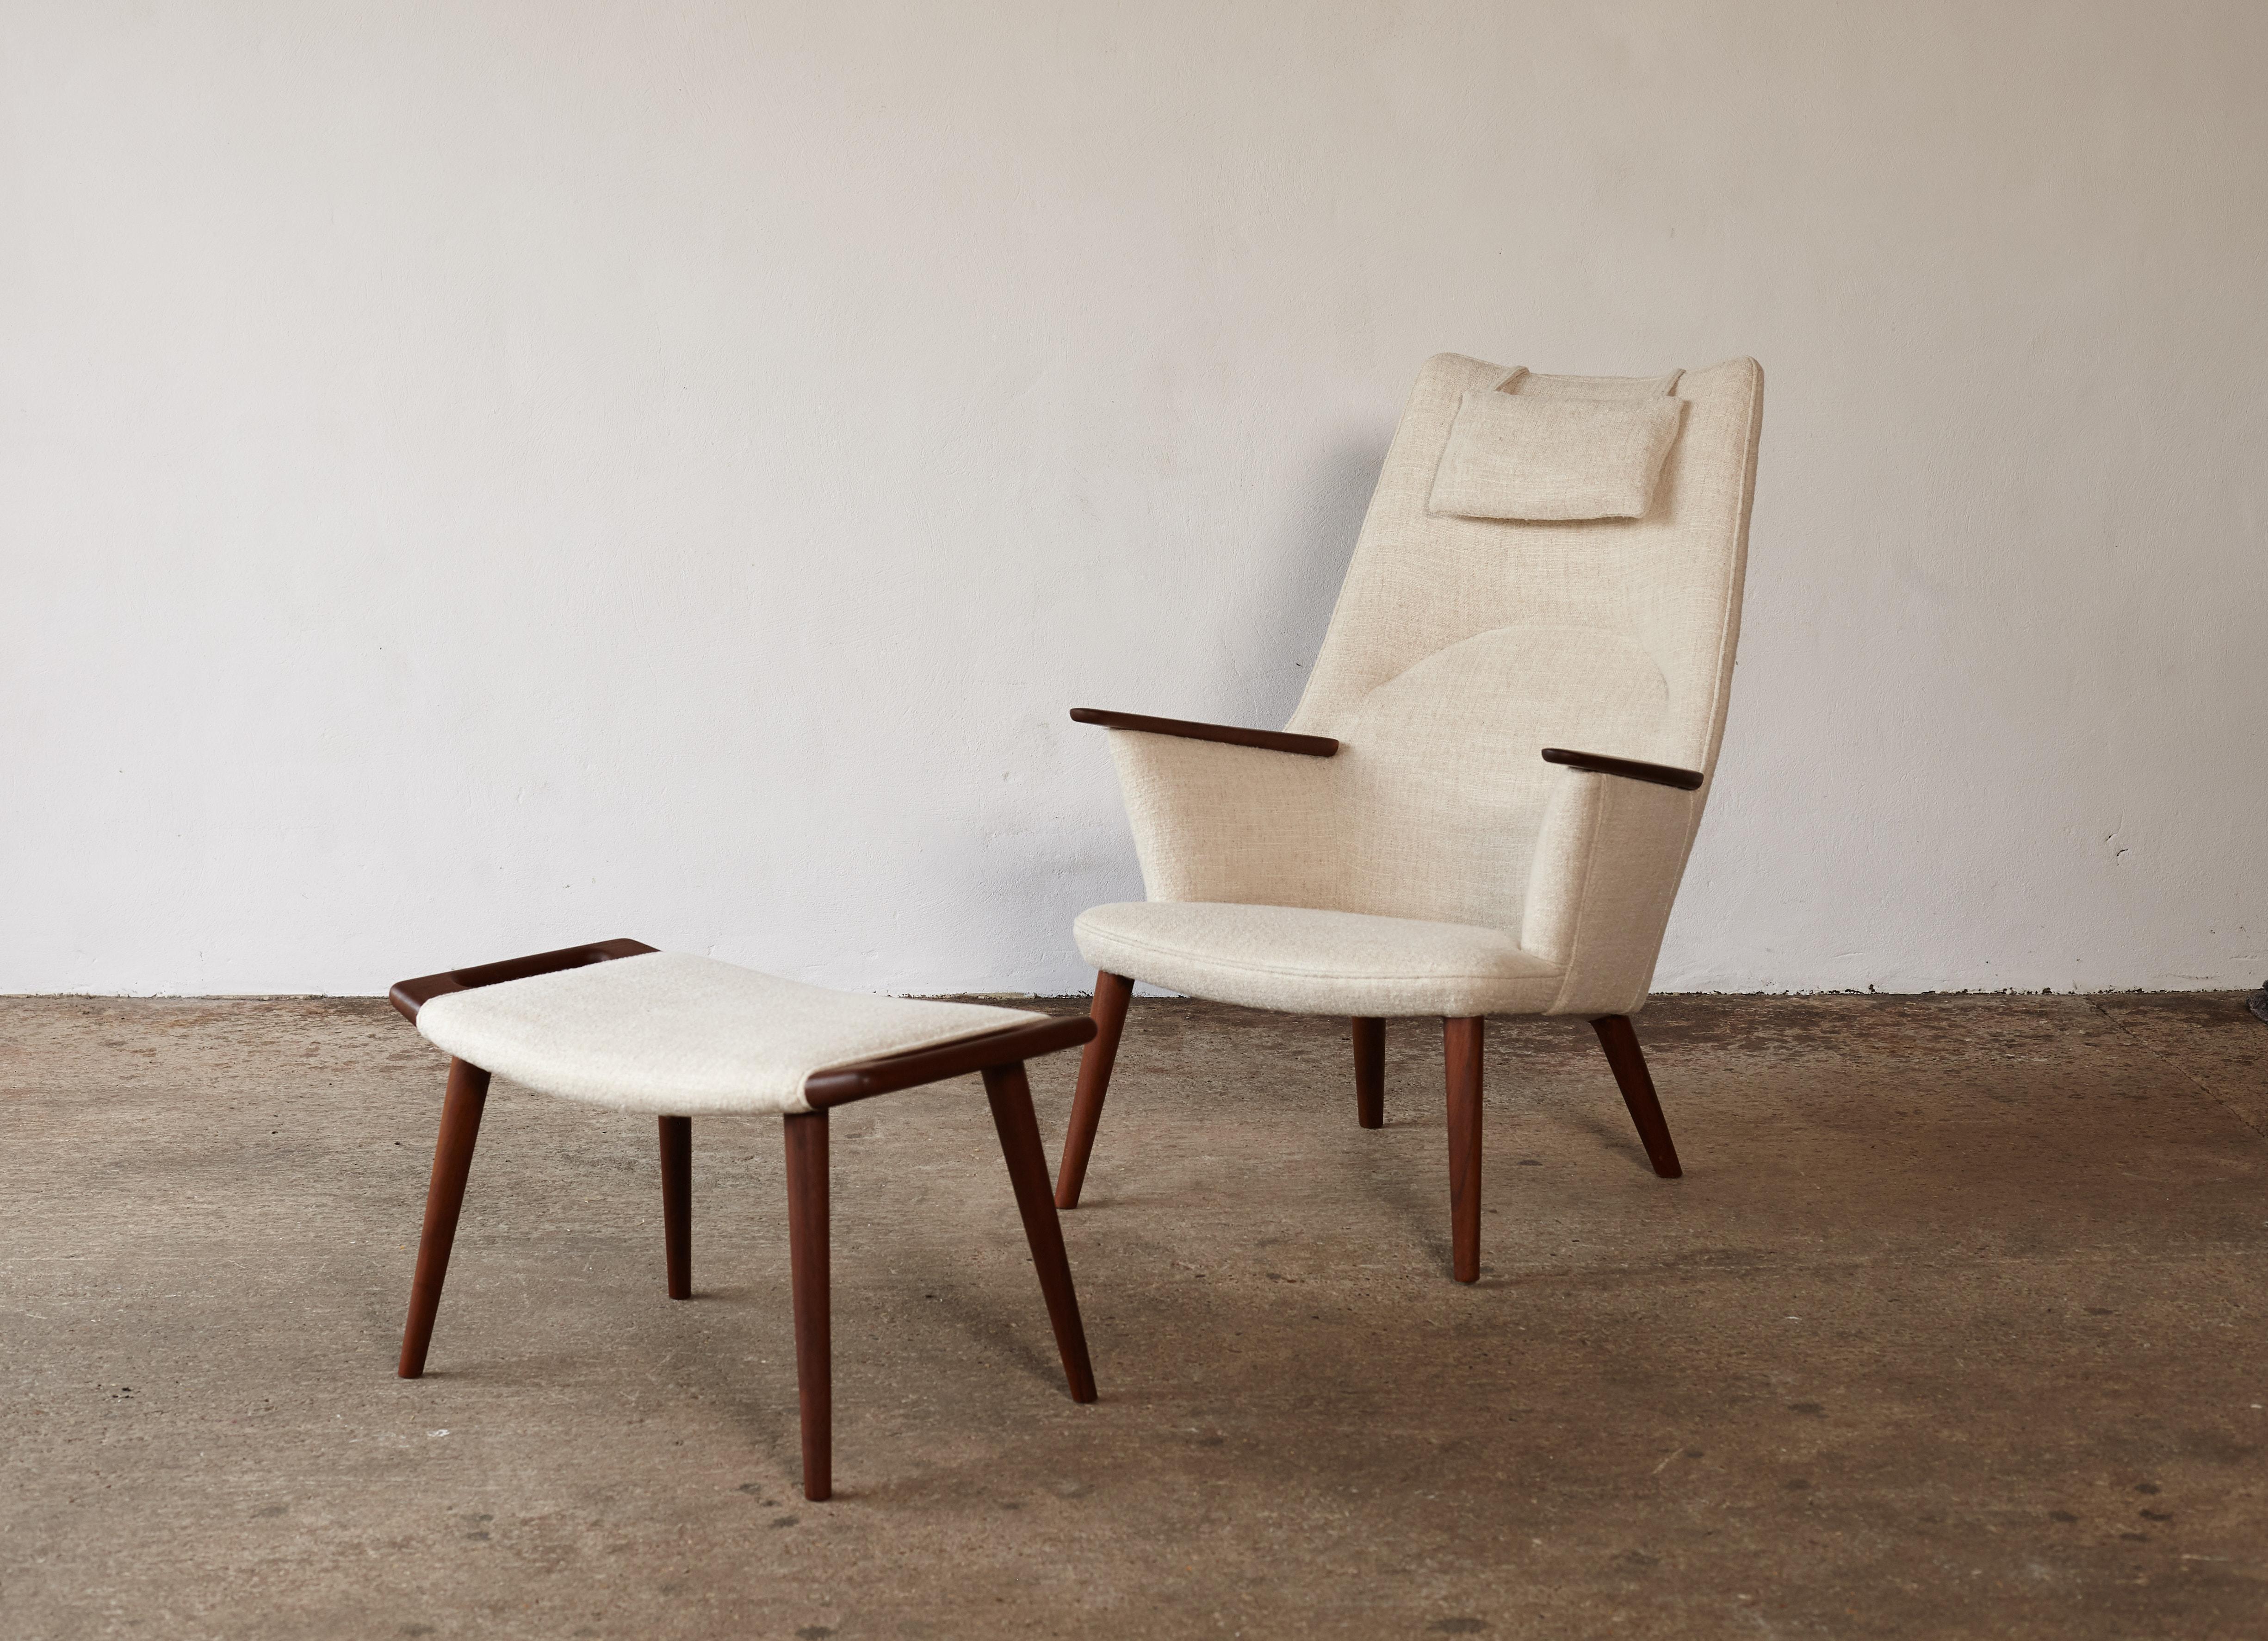 A wonderful Hans Wegner AP-27 chair (sometimes called Mama Bear Chair) and ottoman, AP Stolen, Denmark, 1950s. Recovered in Pierre Frey fabric. Very good condition. Stamped with makers mark.  Ships worldwide.